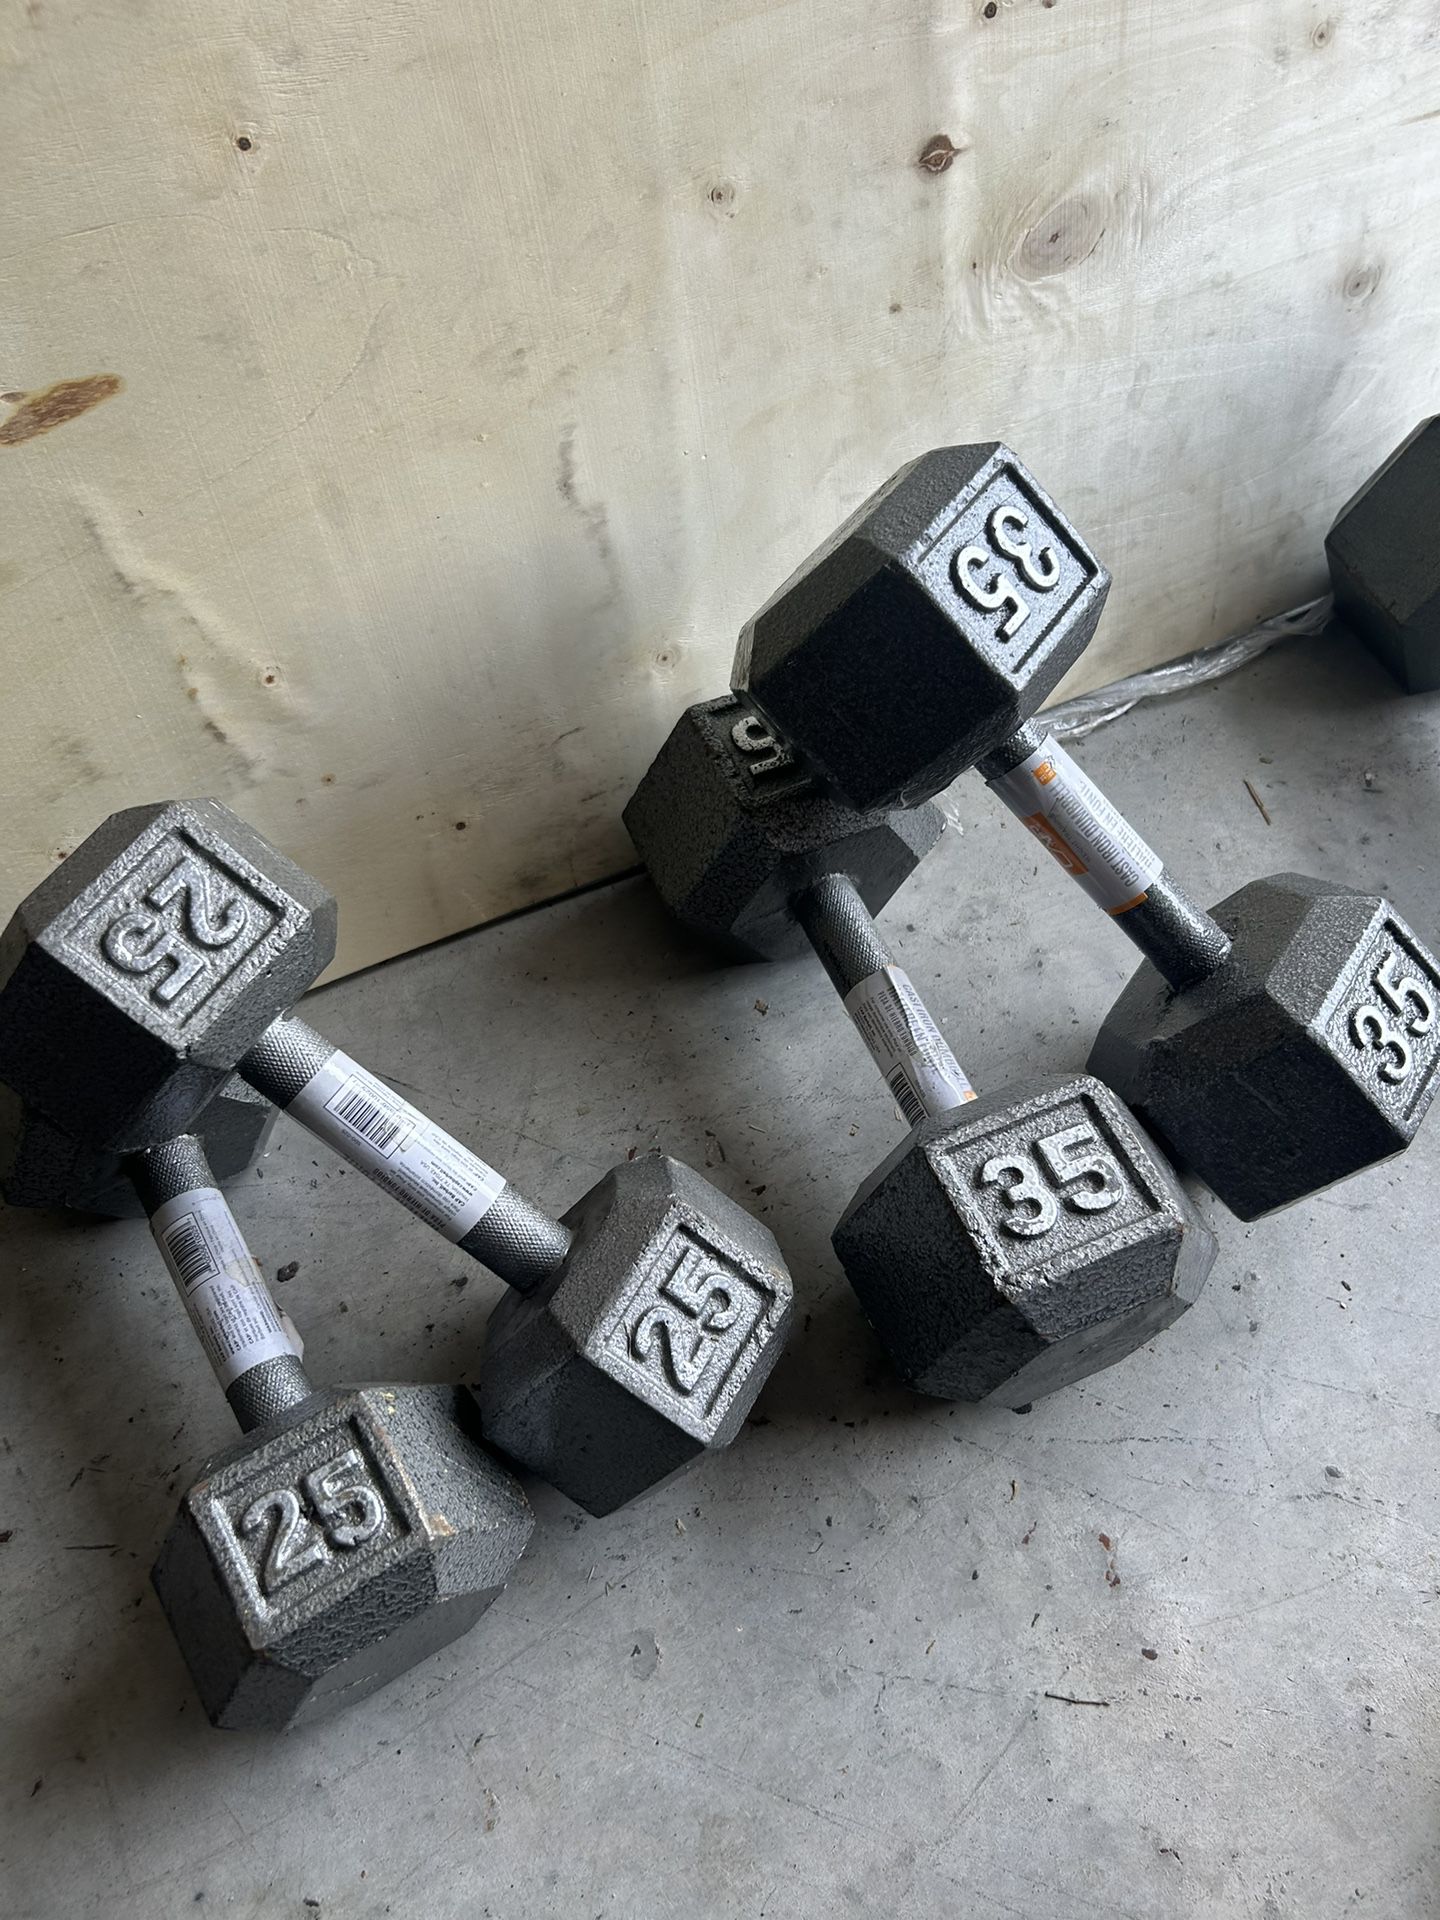 New pair of 25 and 35lb iron dumbbells